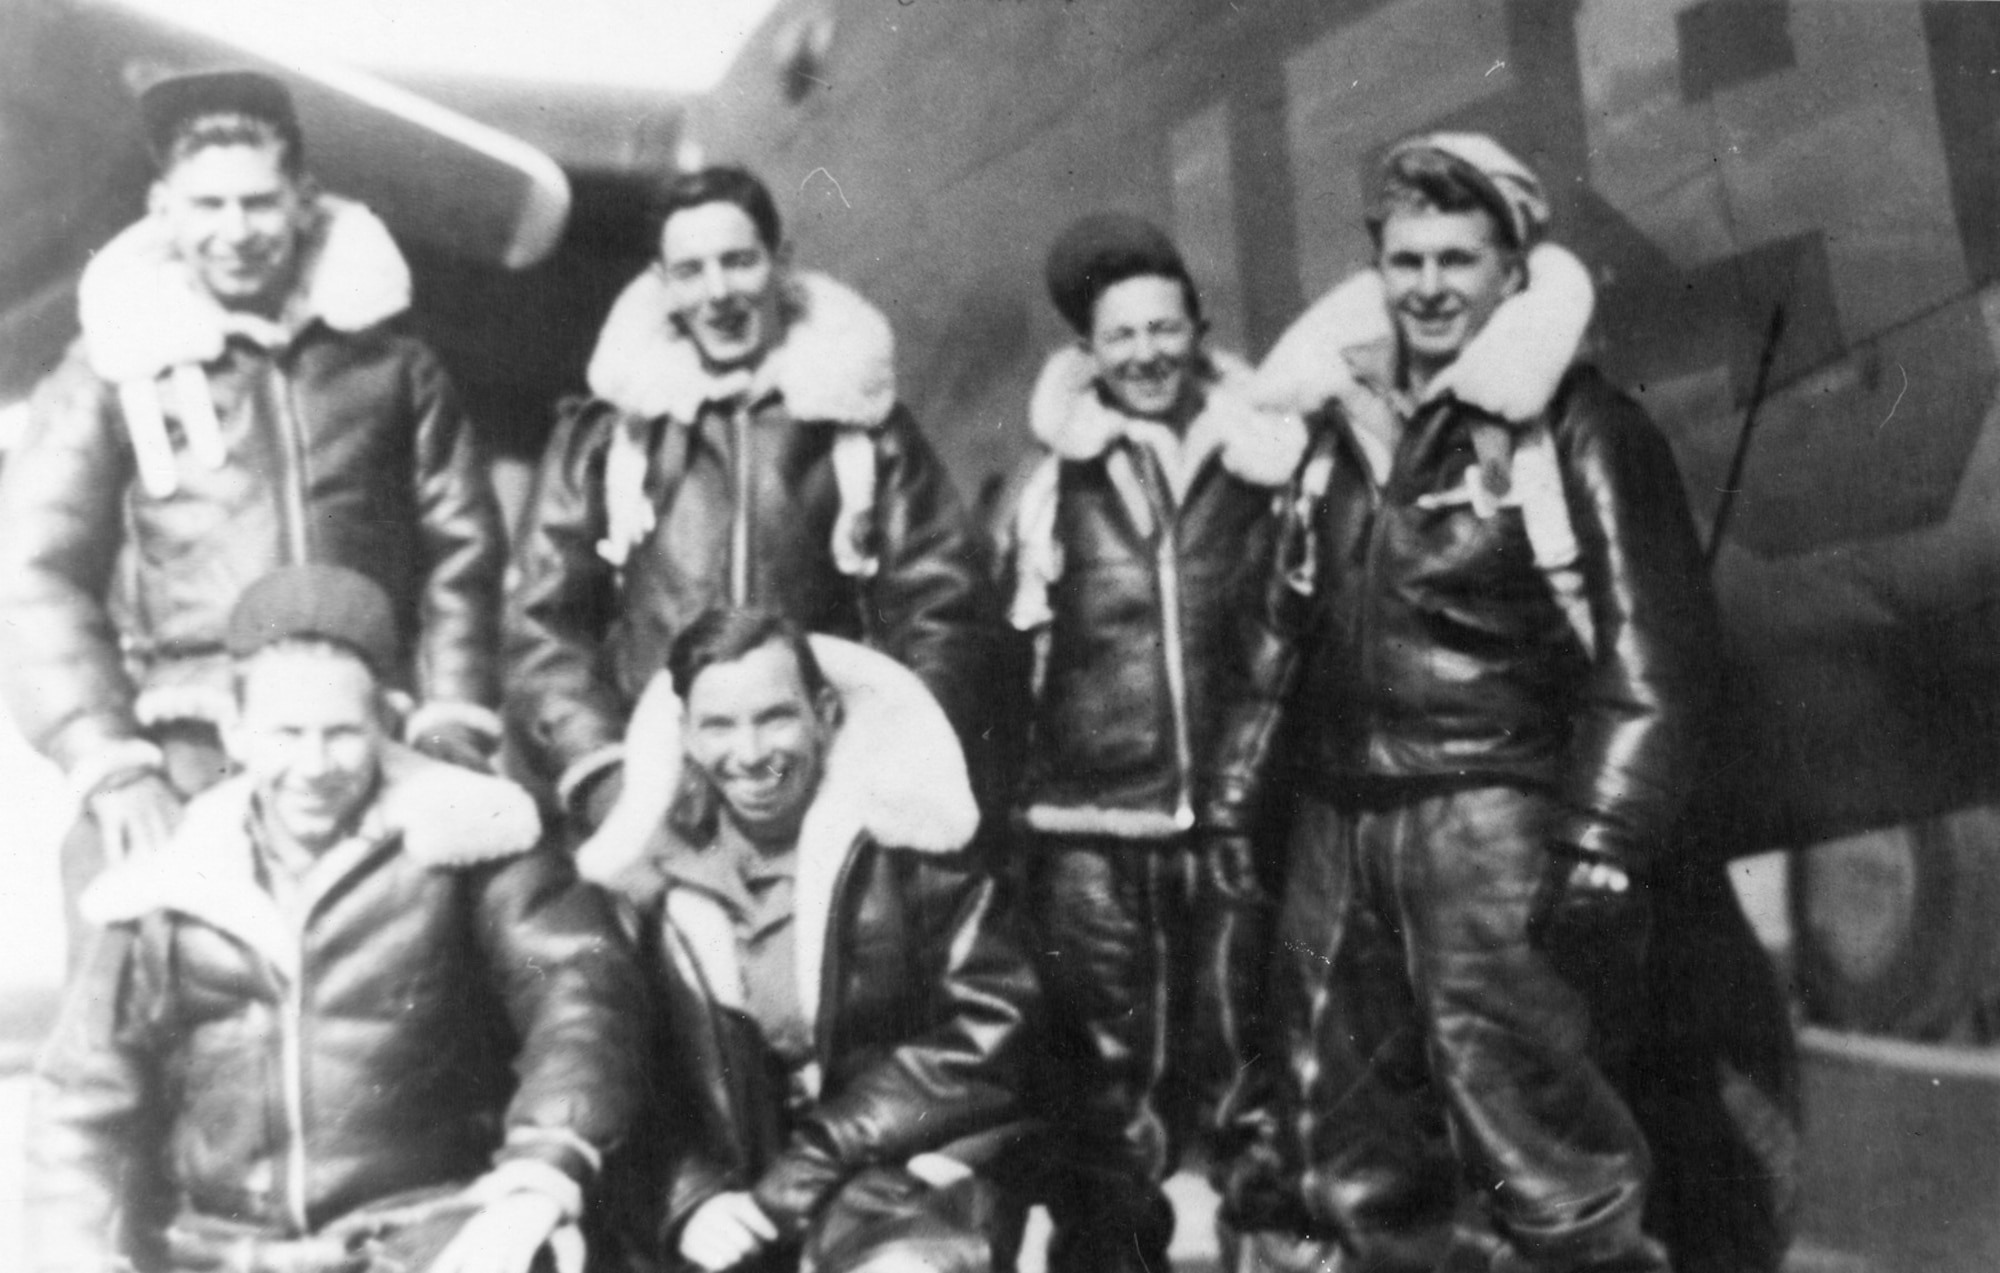 John D. Foley “Johnny Zero” (center, kneeling) and other crew members of Martin B-26 Marauder, 19th Bomb Squadron. Southwest Pacific. (U.S. Air Force photo).